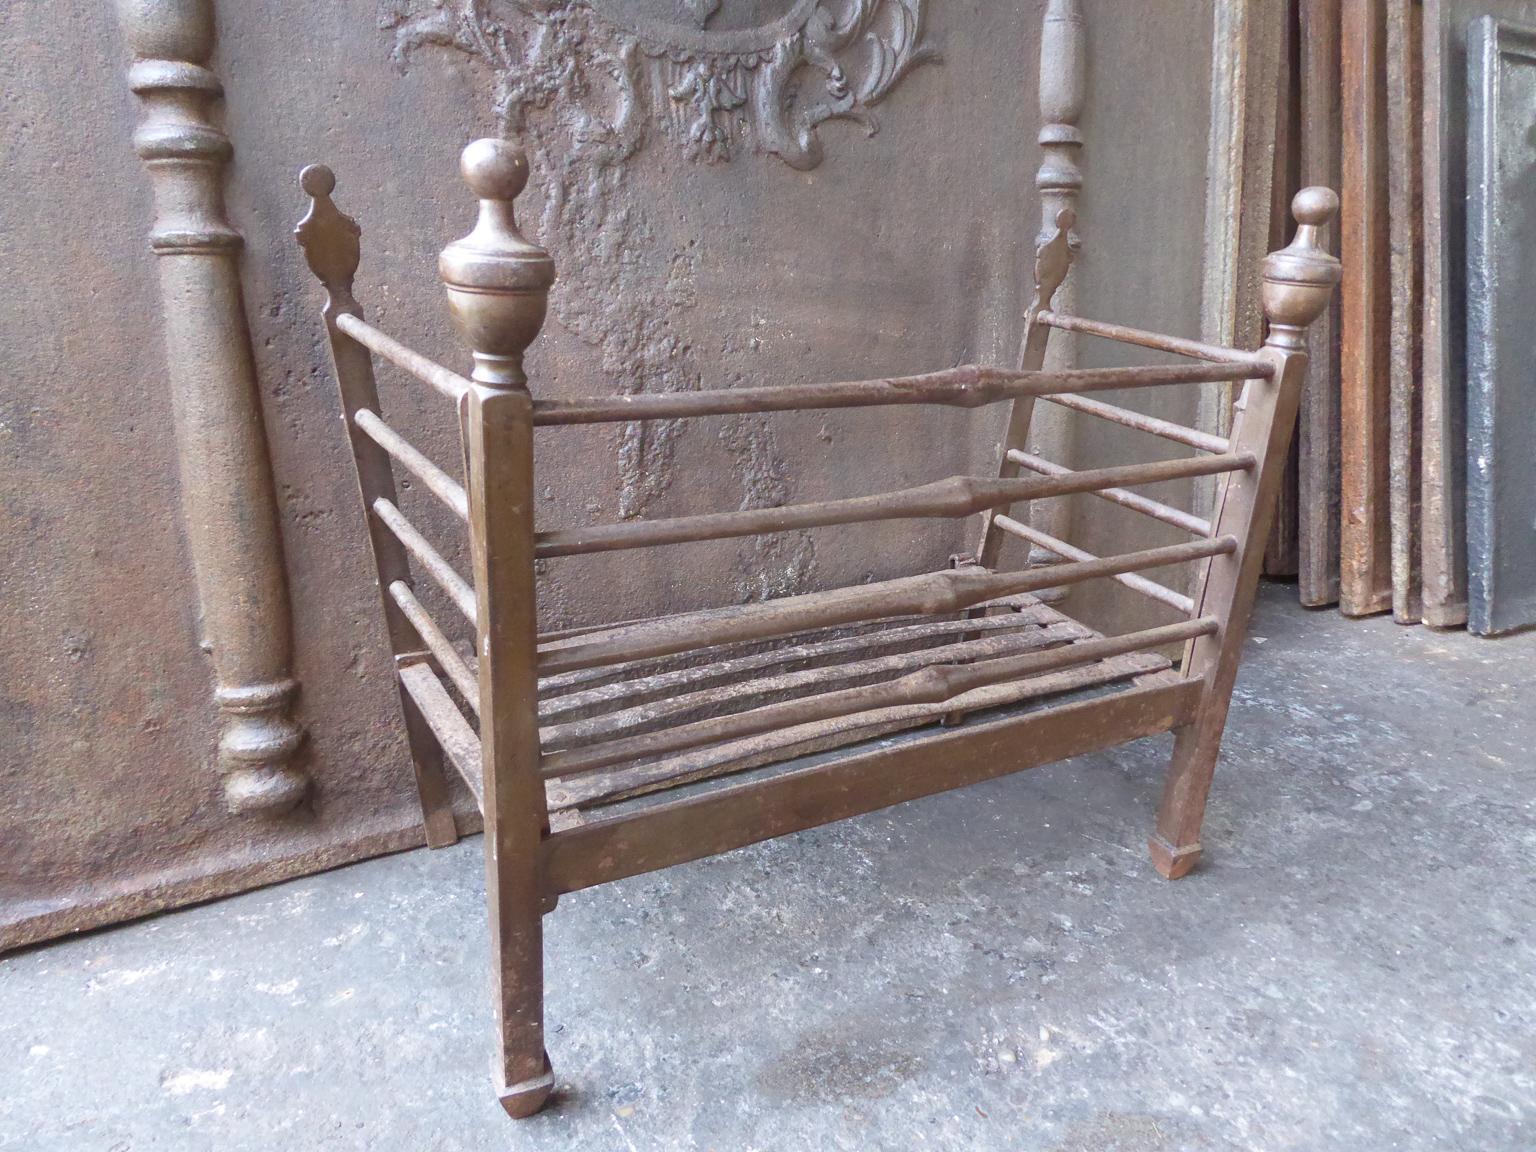 Wrought Iron 18th-19th Century Dutch Fireplace Grate or Fire Basket